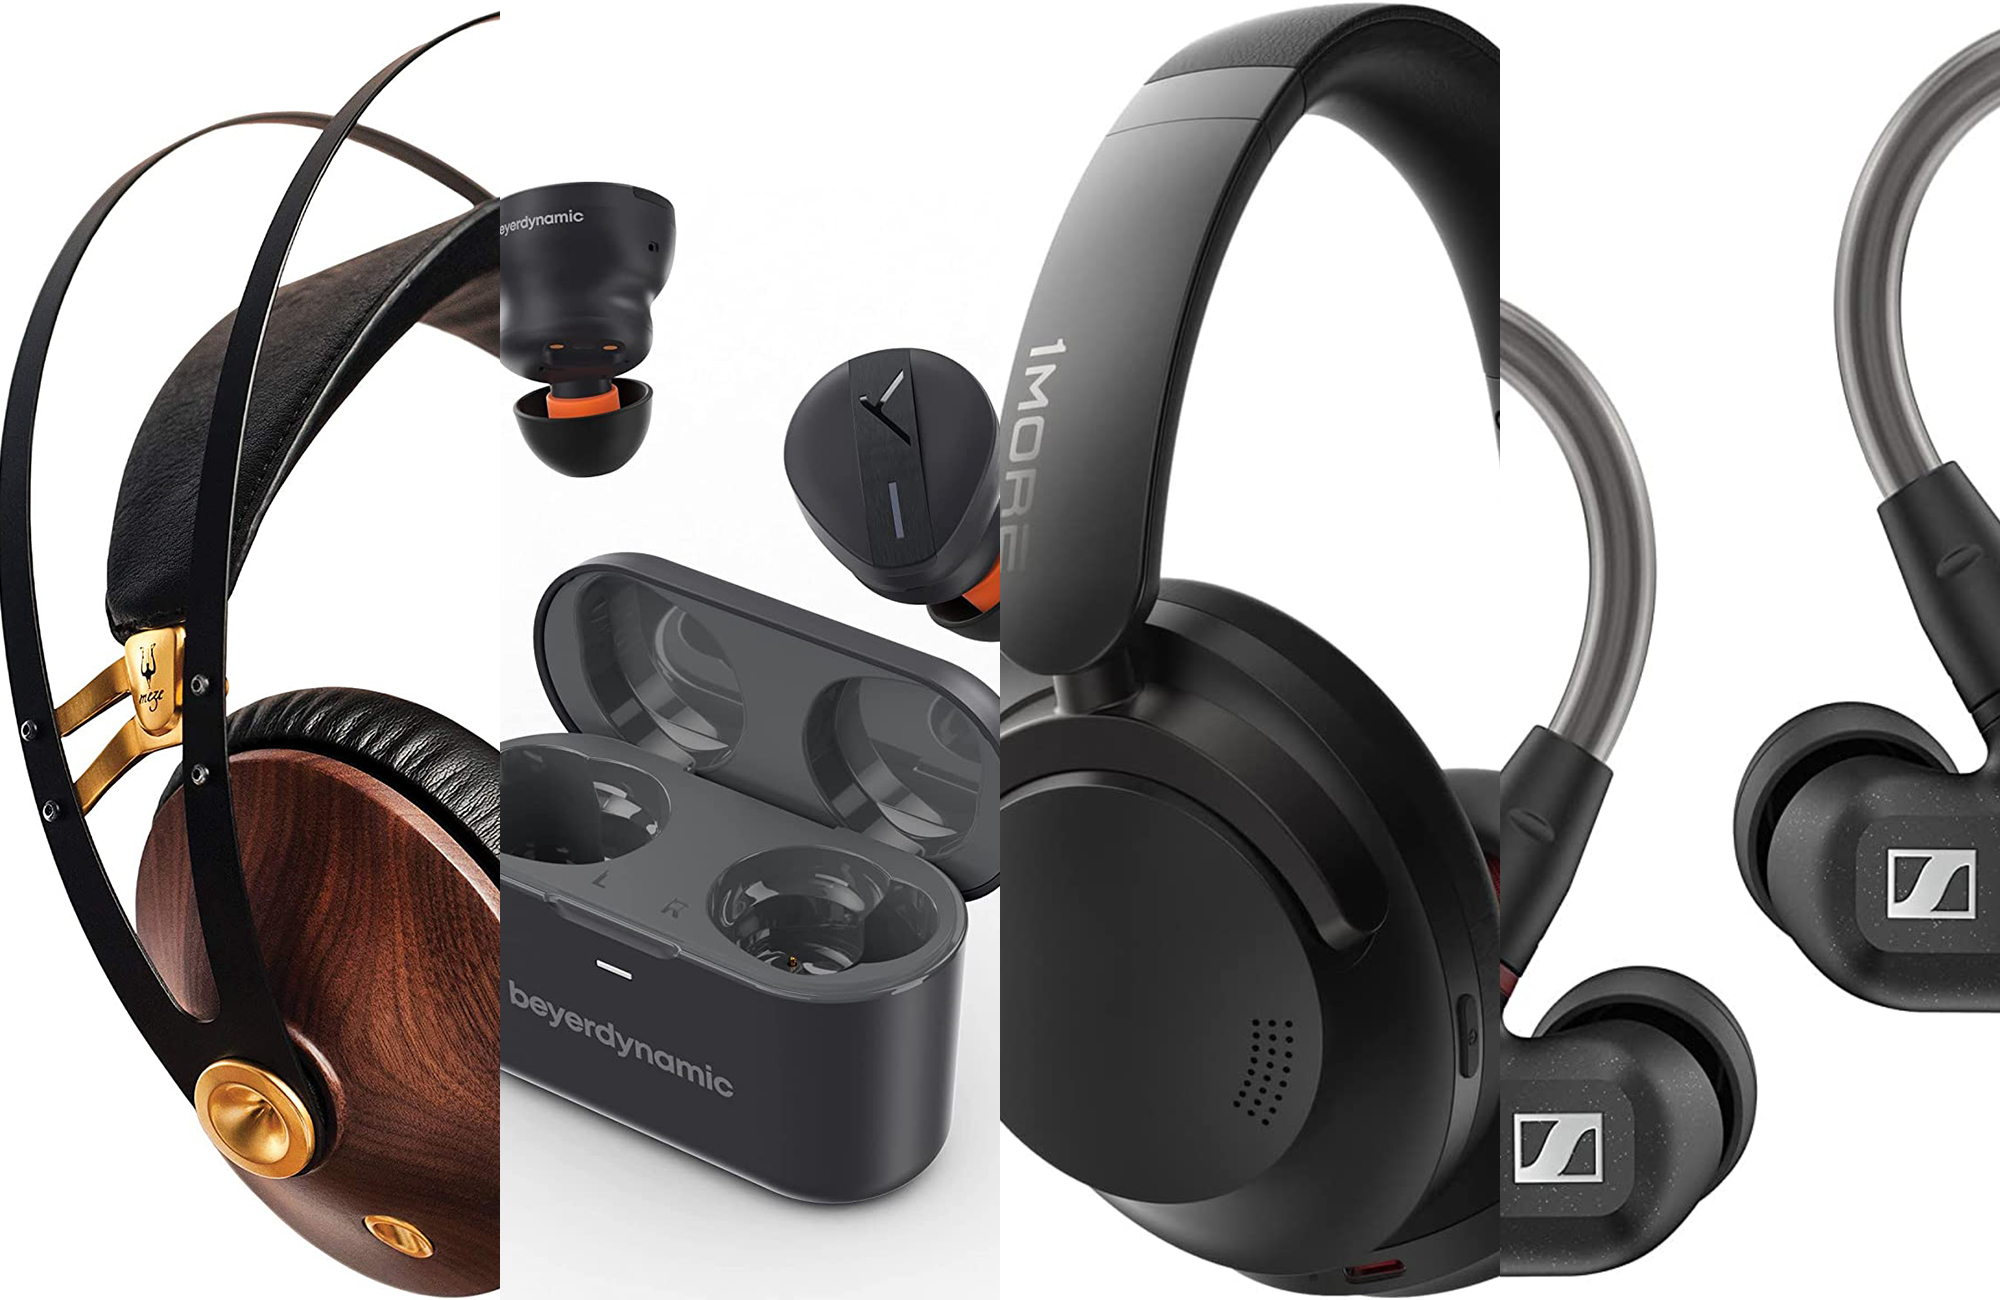 Black Friday headphone deals: 70+ earbuds, over-ears, and more